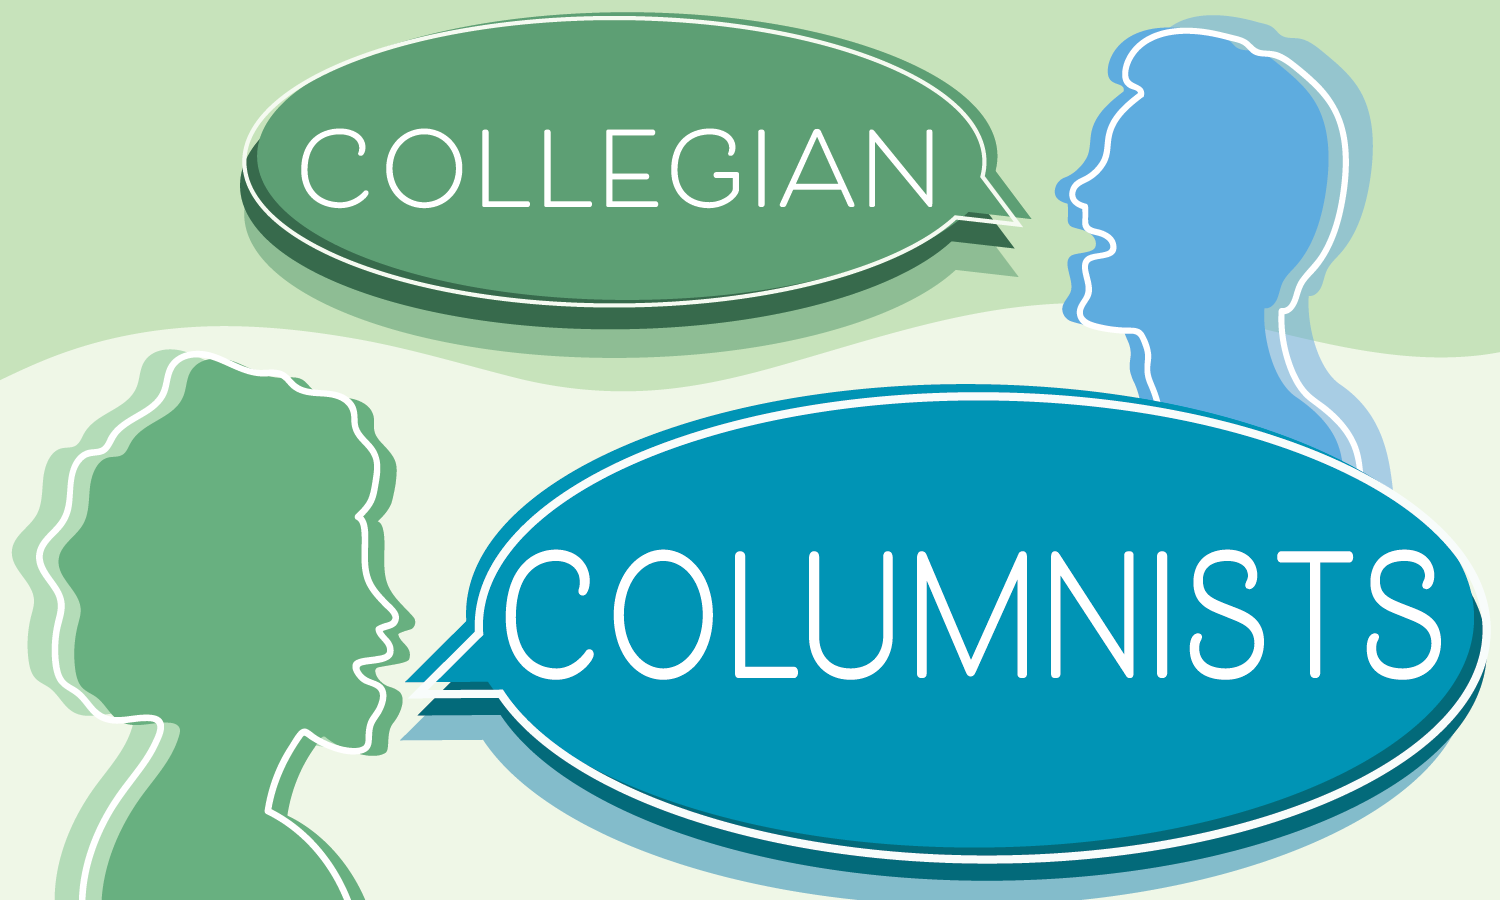 A blue and green graphic depicting two people conversing with text bubbles that say "Collegian Columnists."